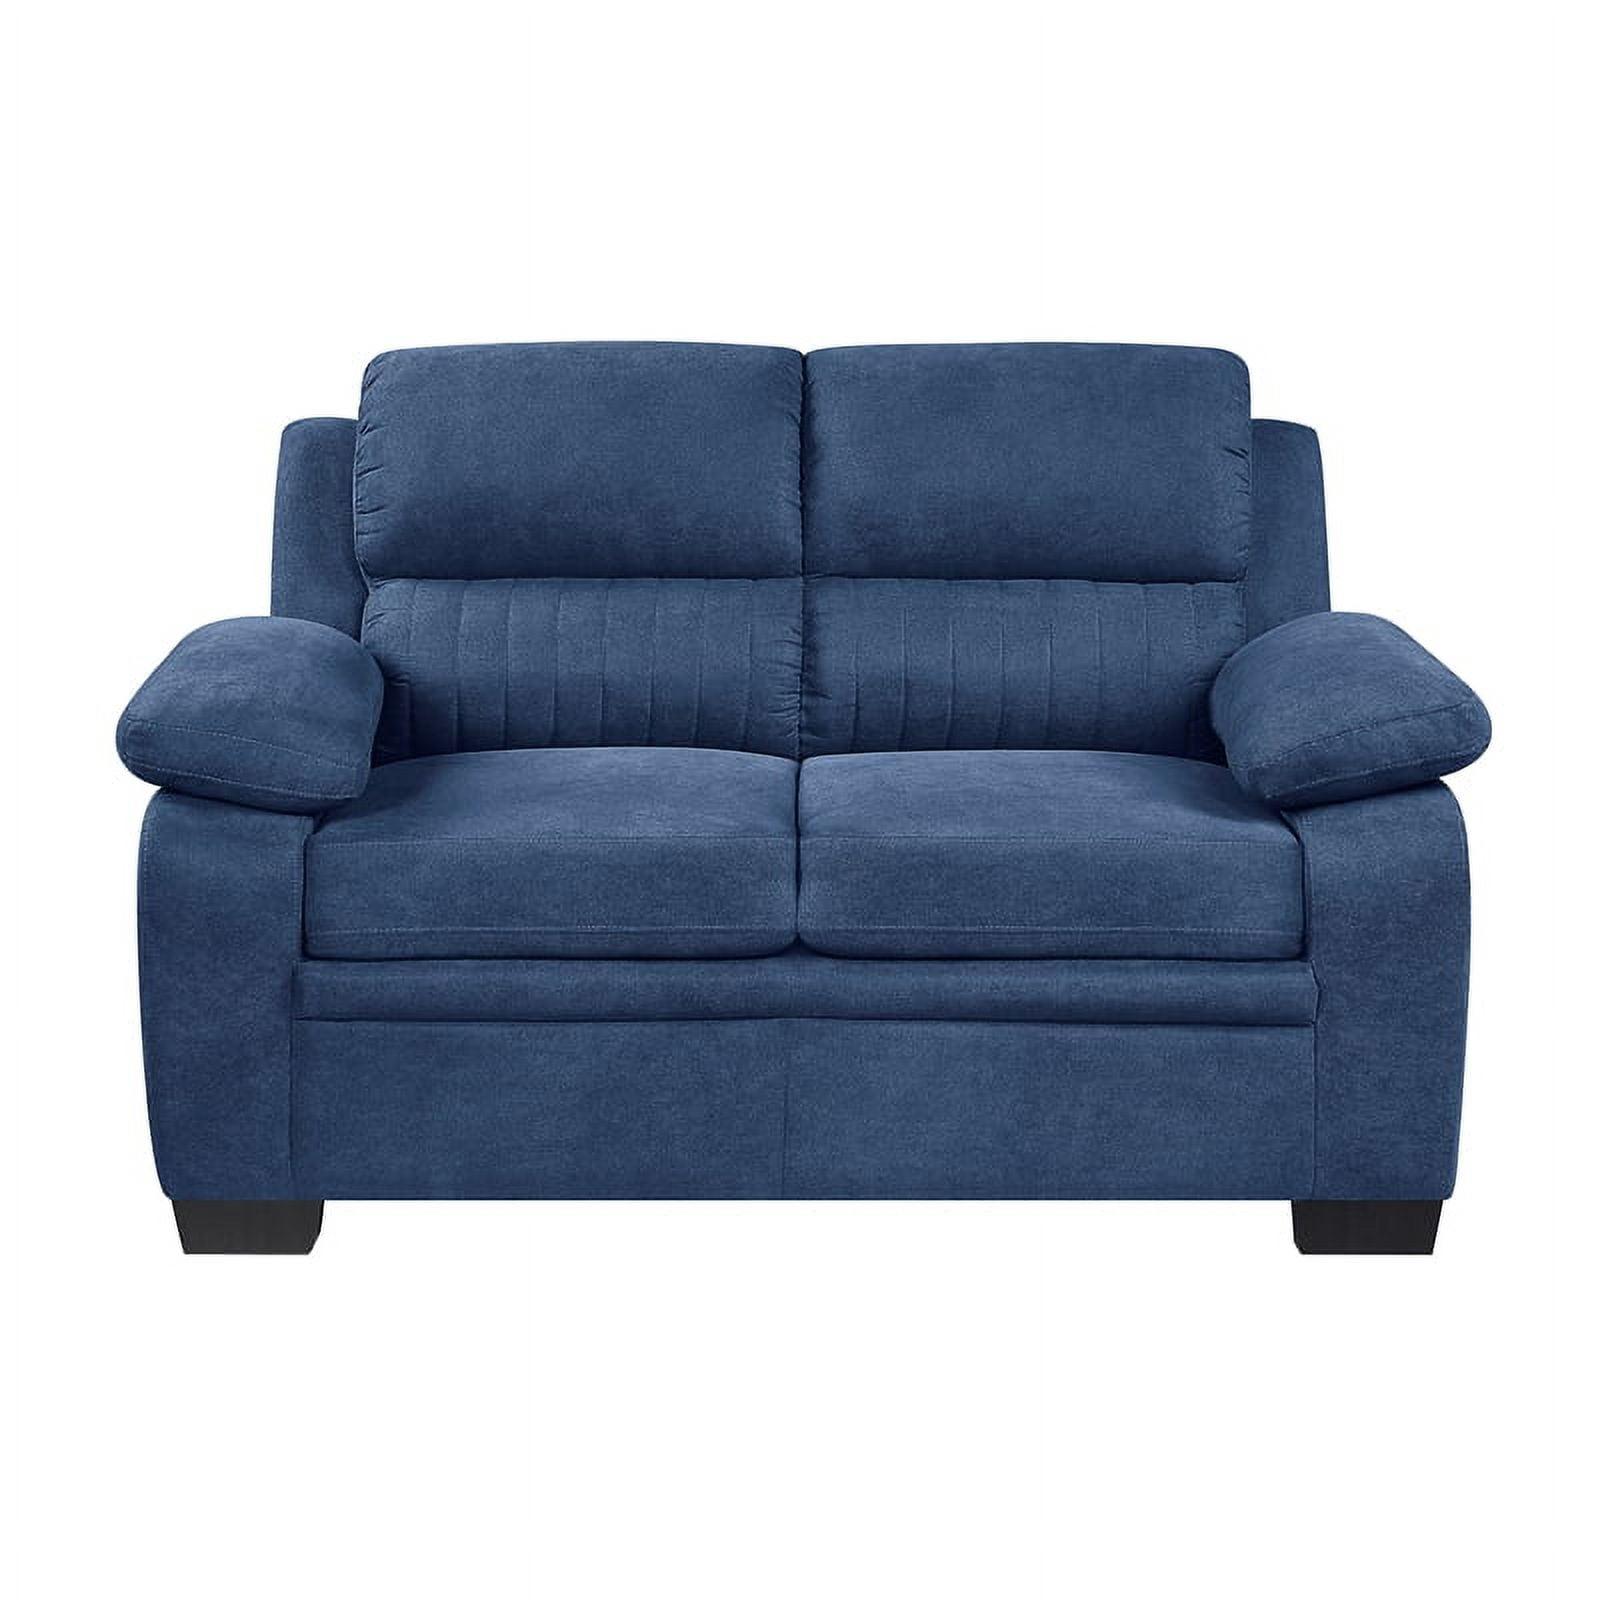 Holleman Plush Blue Fabric Loveseat with Pillow-Top Arms and Wood Frame